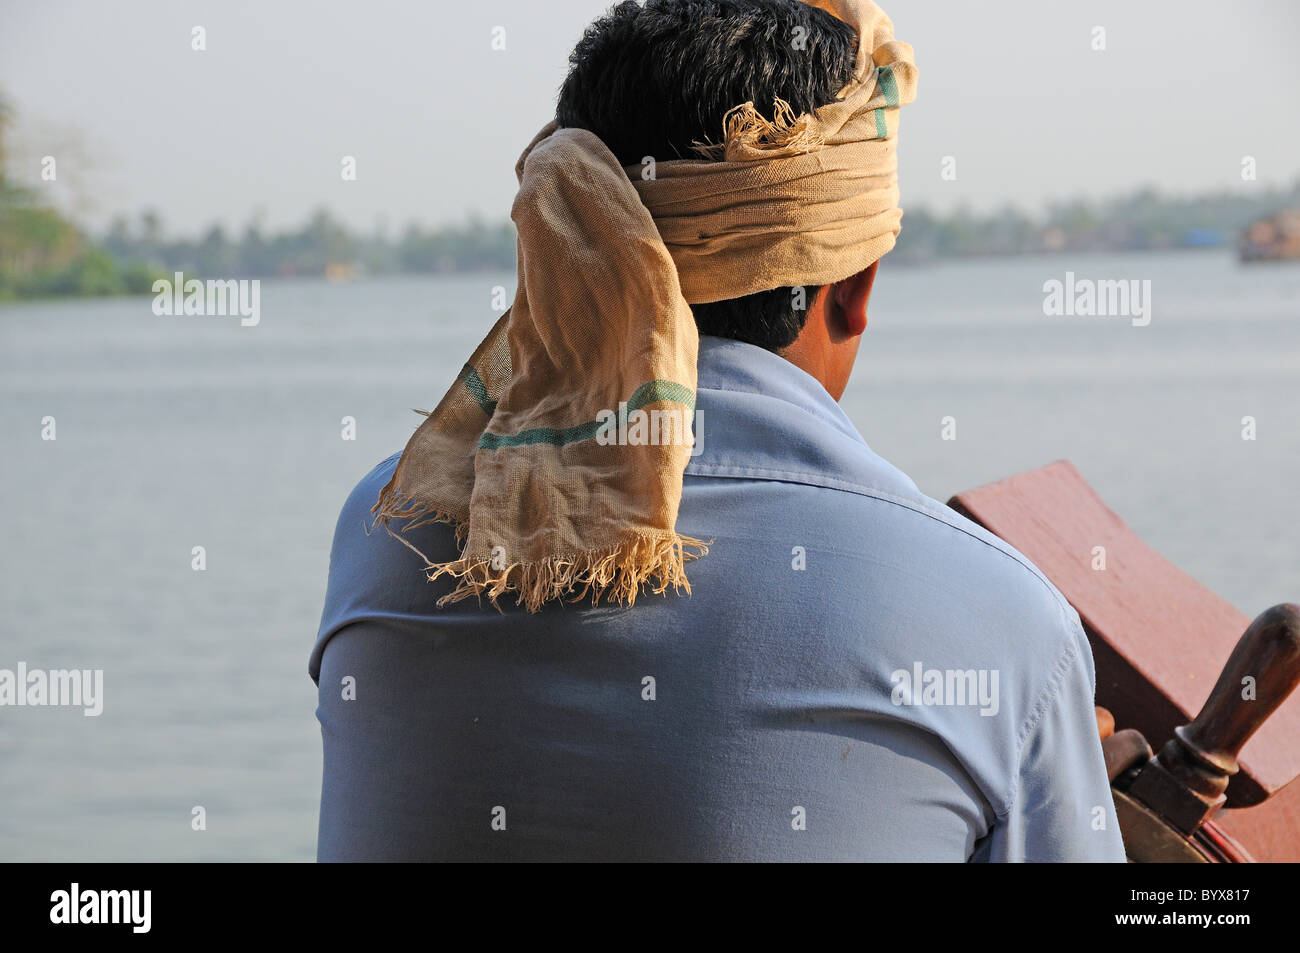 Houseboat on the Backwaters of Kerala being driven by the boat captain, India Stock Photo